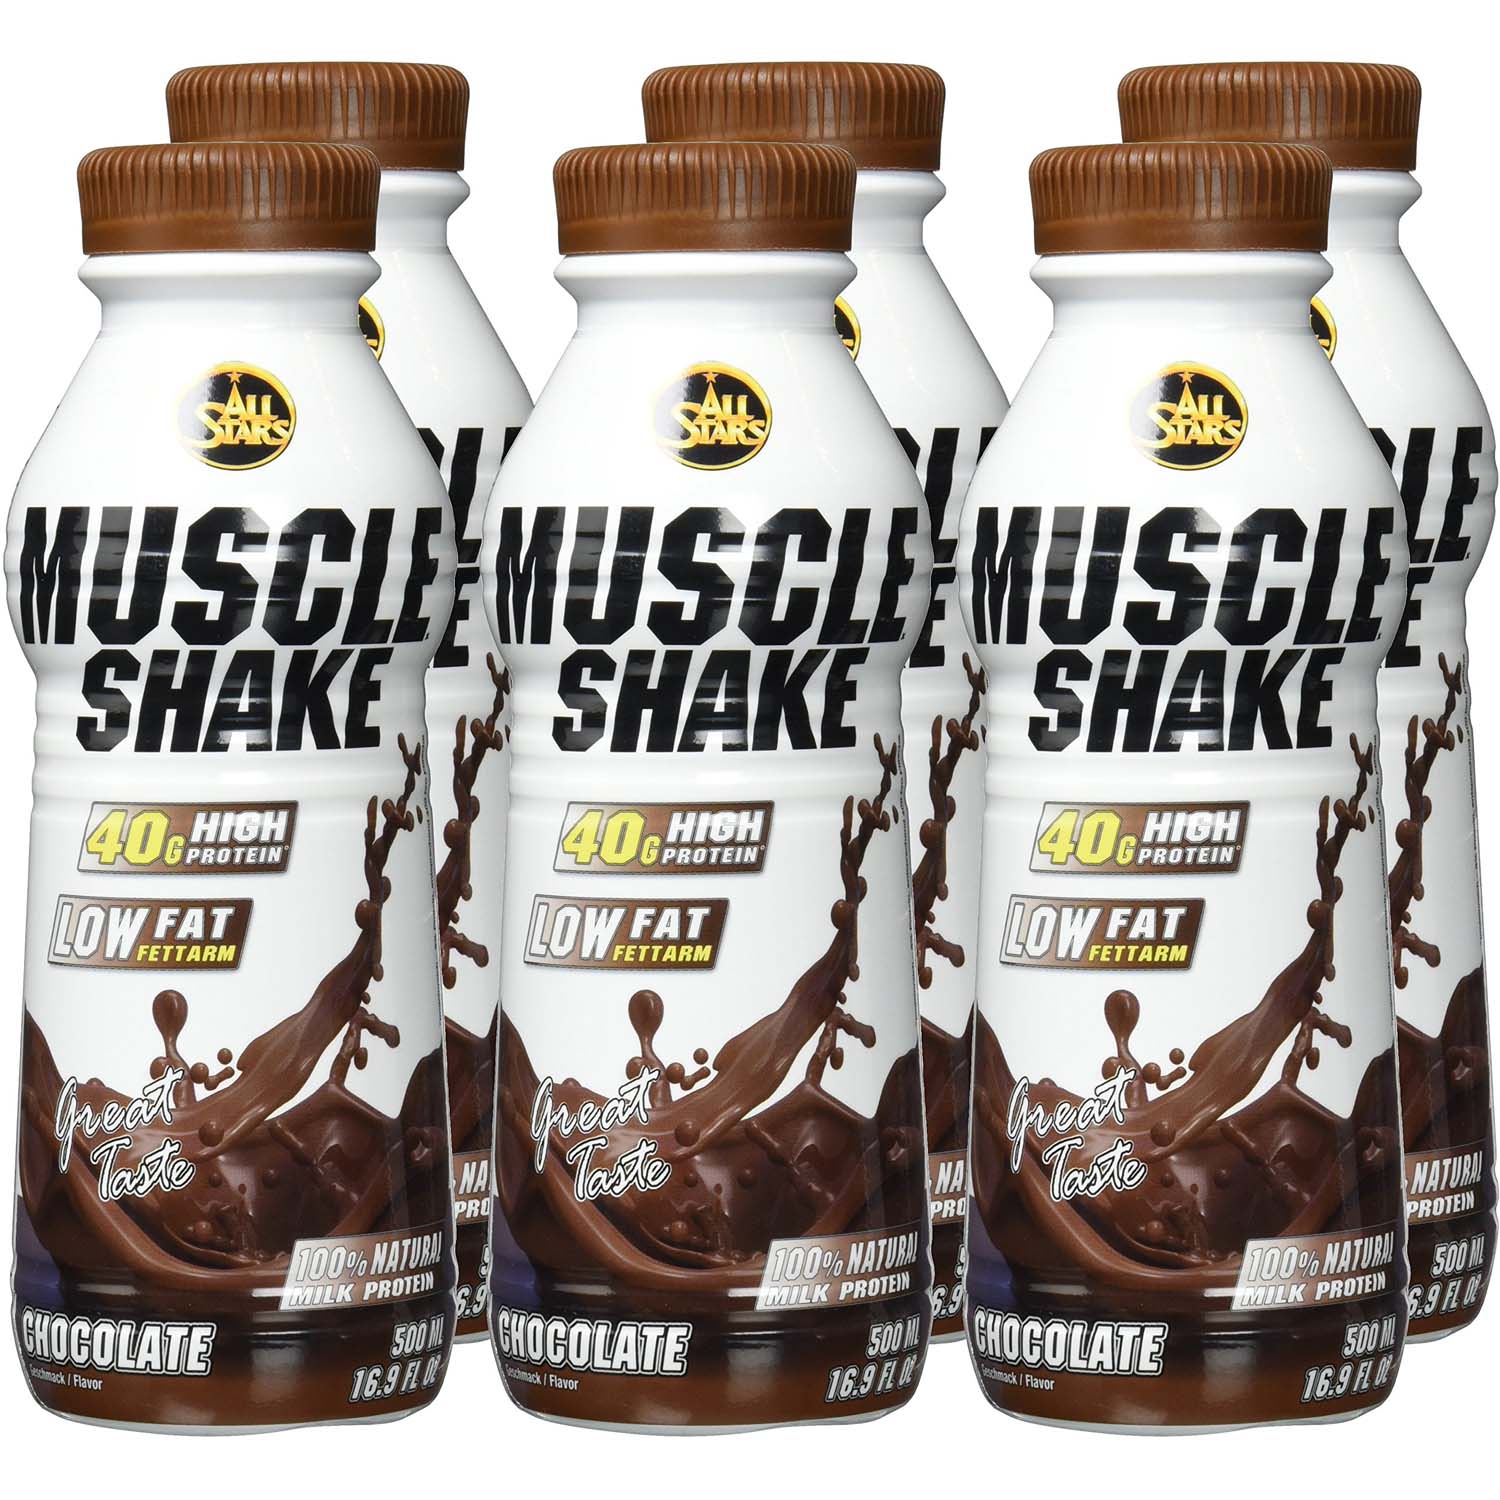 All Stars Protein Muscle Shake Box of 6 Pieces Milk Chocolate